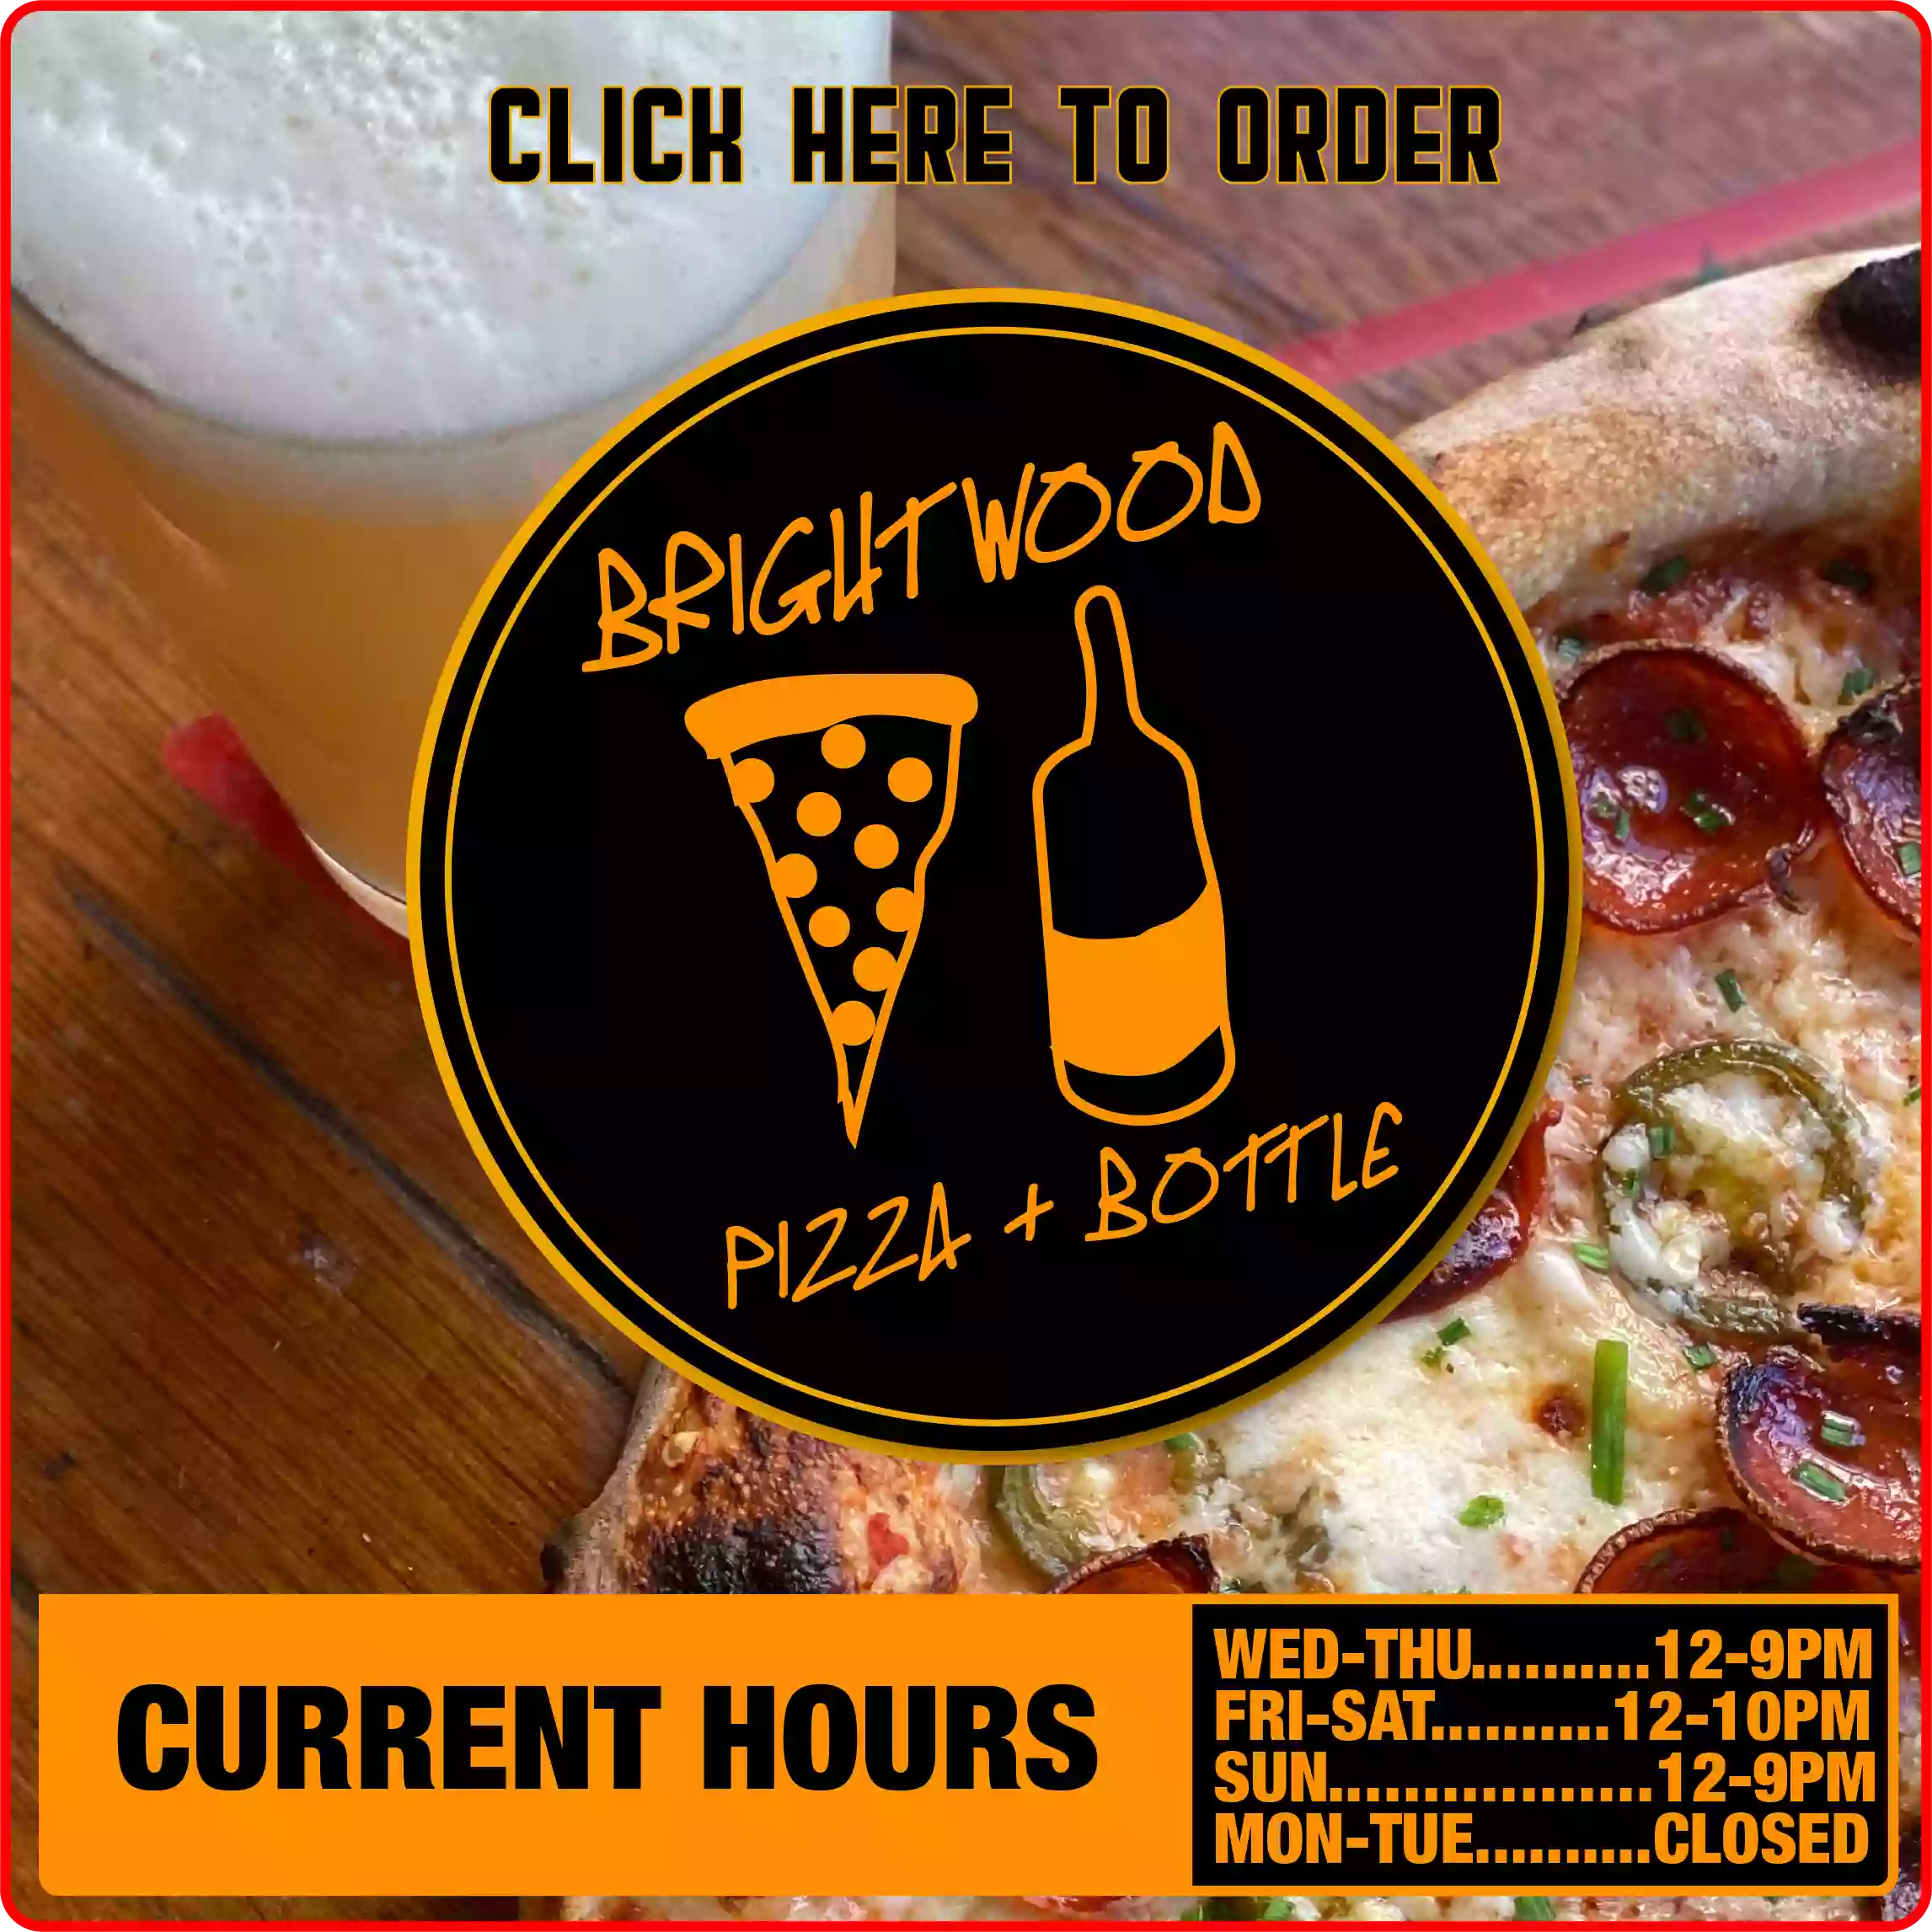 Brightwood Pizza & Bottle